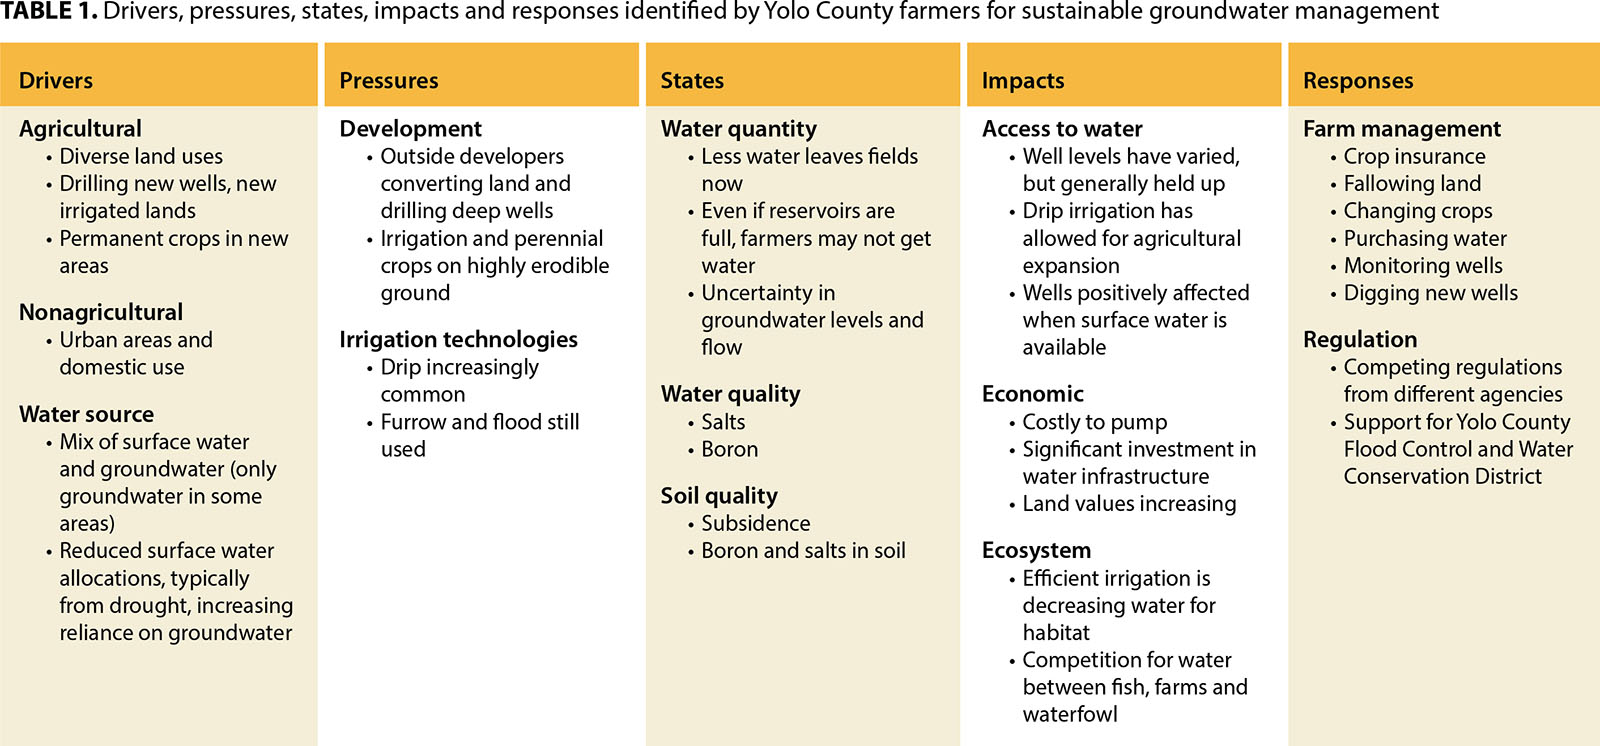 Drivers, pressures, states, impacts and responses identified by Yolo County farmers for sustainable groundwater management